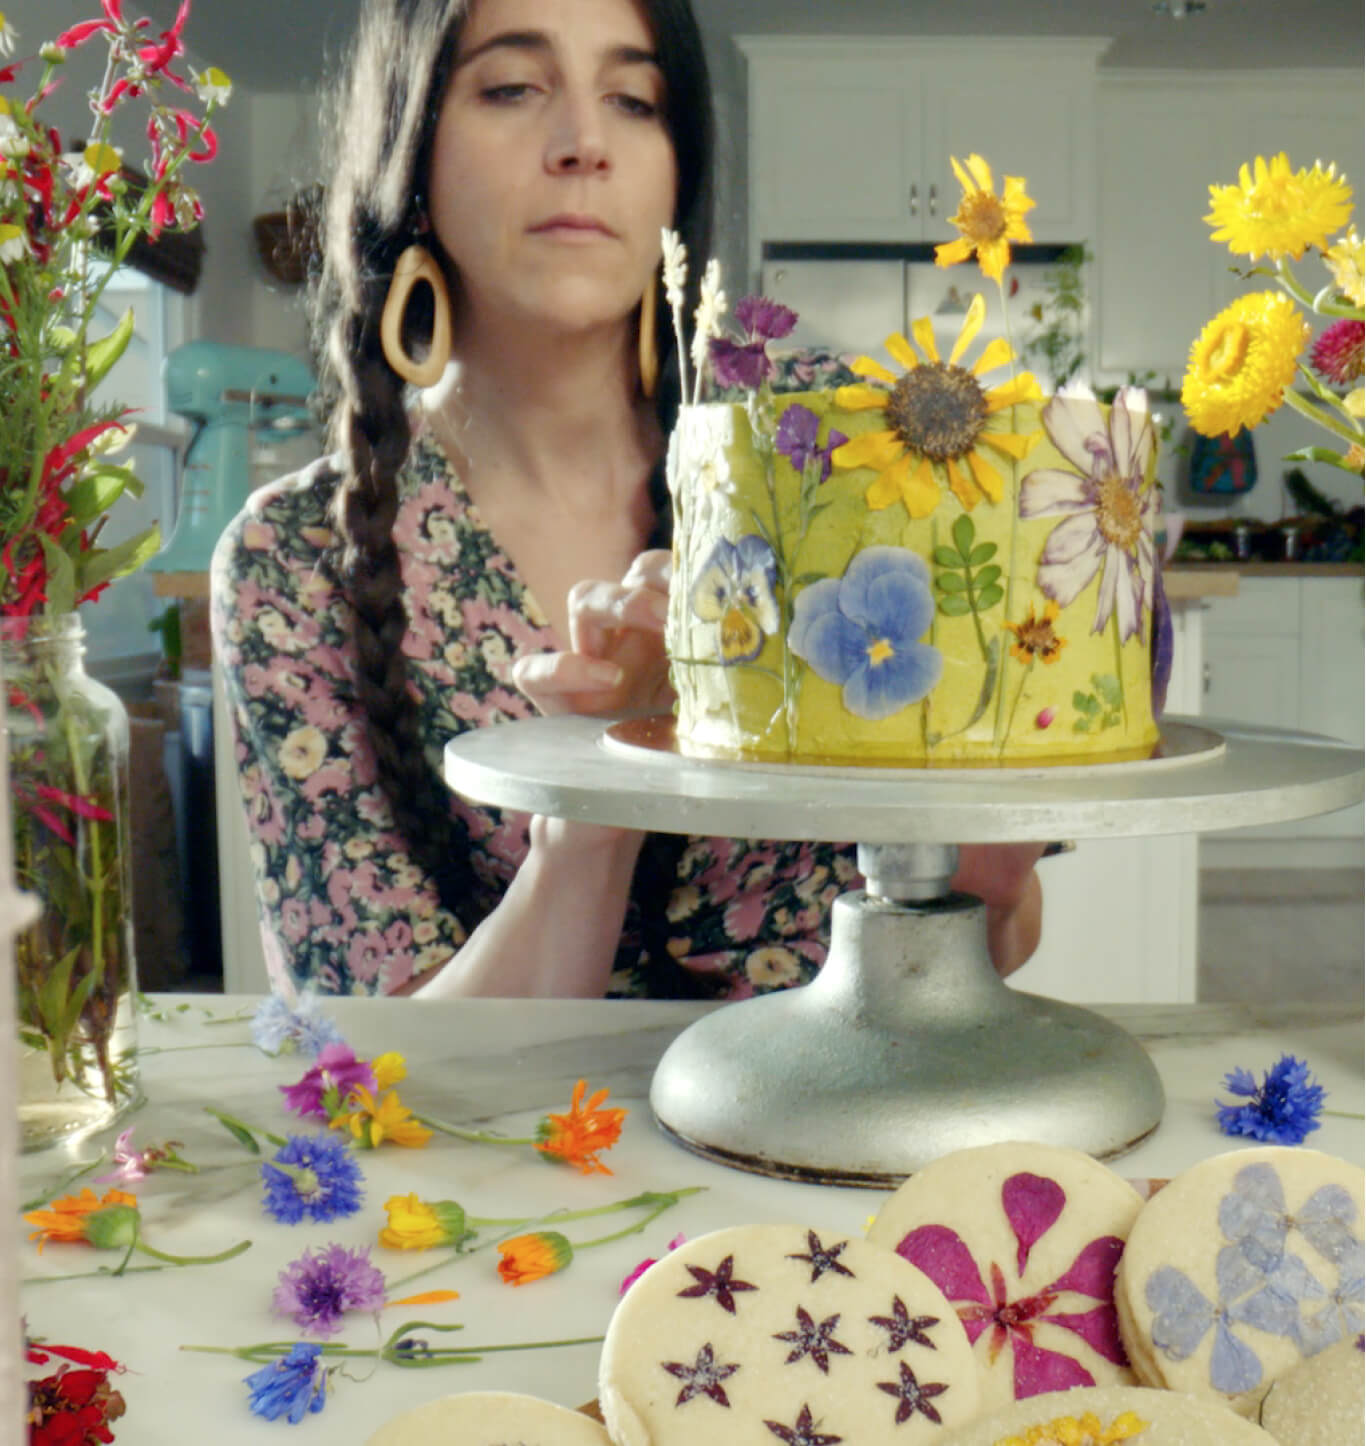 Loria Stern decorating a cake with edible flowers.